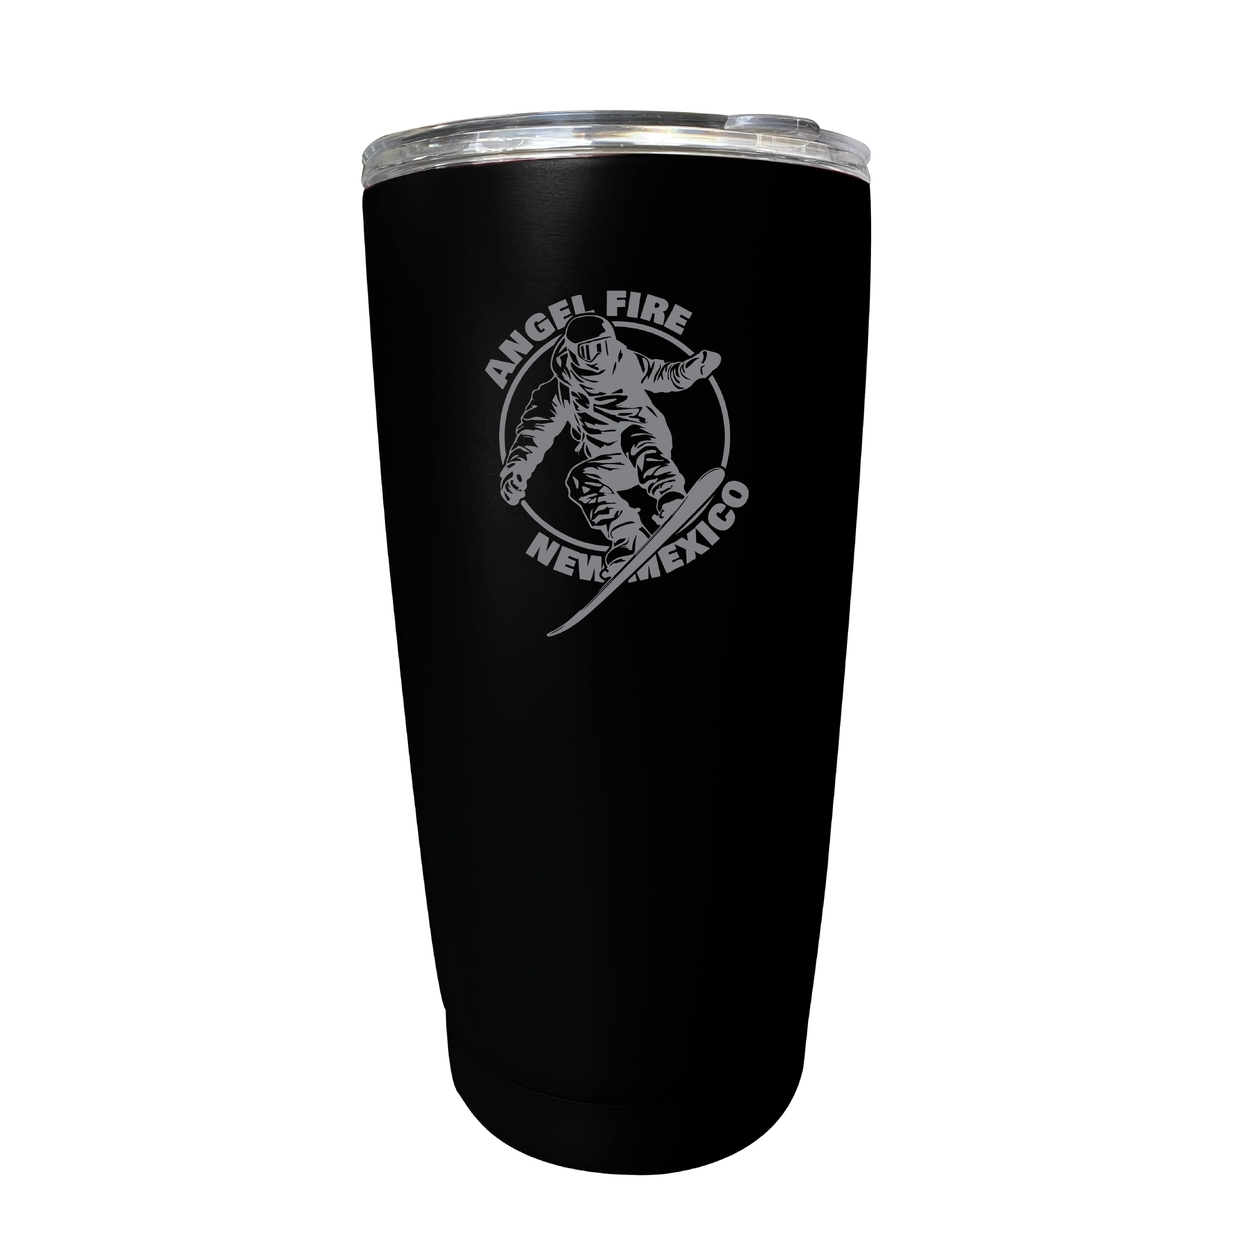 Angel Fire New Mexico Souvenir 16 Oz Engraved Stainless Steel Insulated Tumbler - Black,,2-Pack